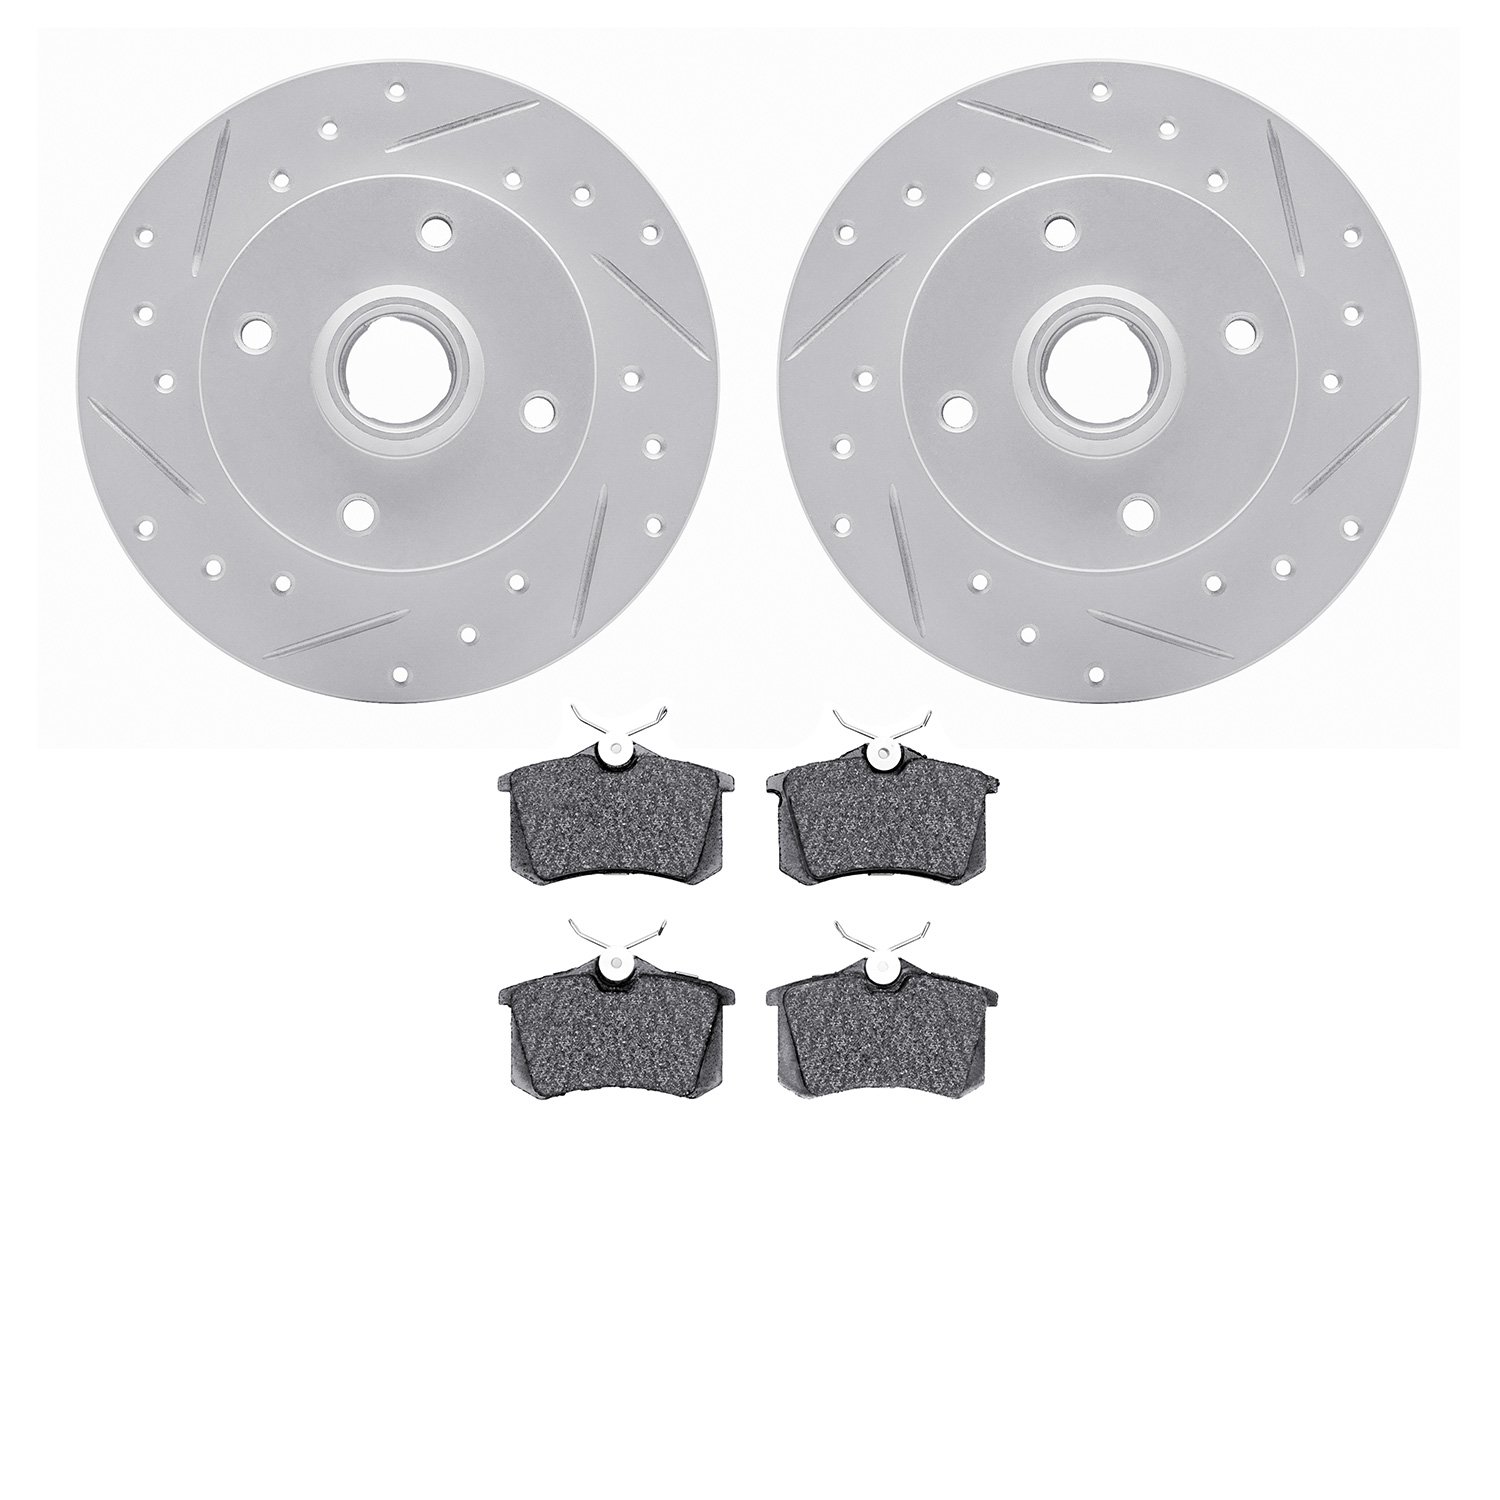 2502-74002 Geoperformance Drilled/Slotted Rotors w/5000 Advanced Brake Pads Kit, 1985-1998 Audi/Volkswagen, Position: Rear